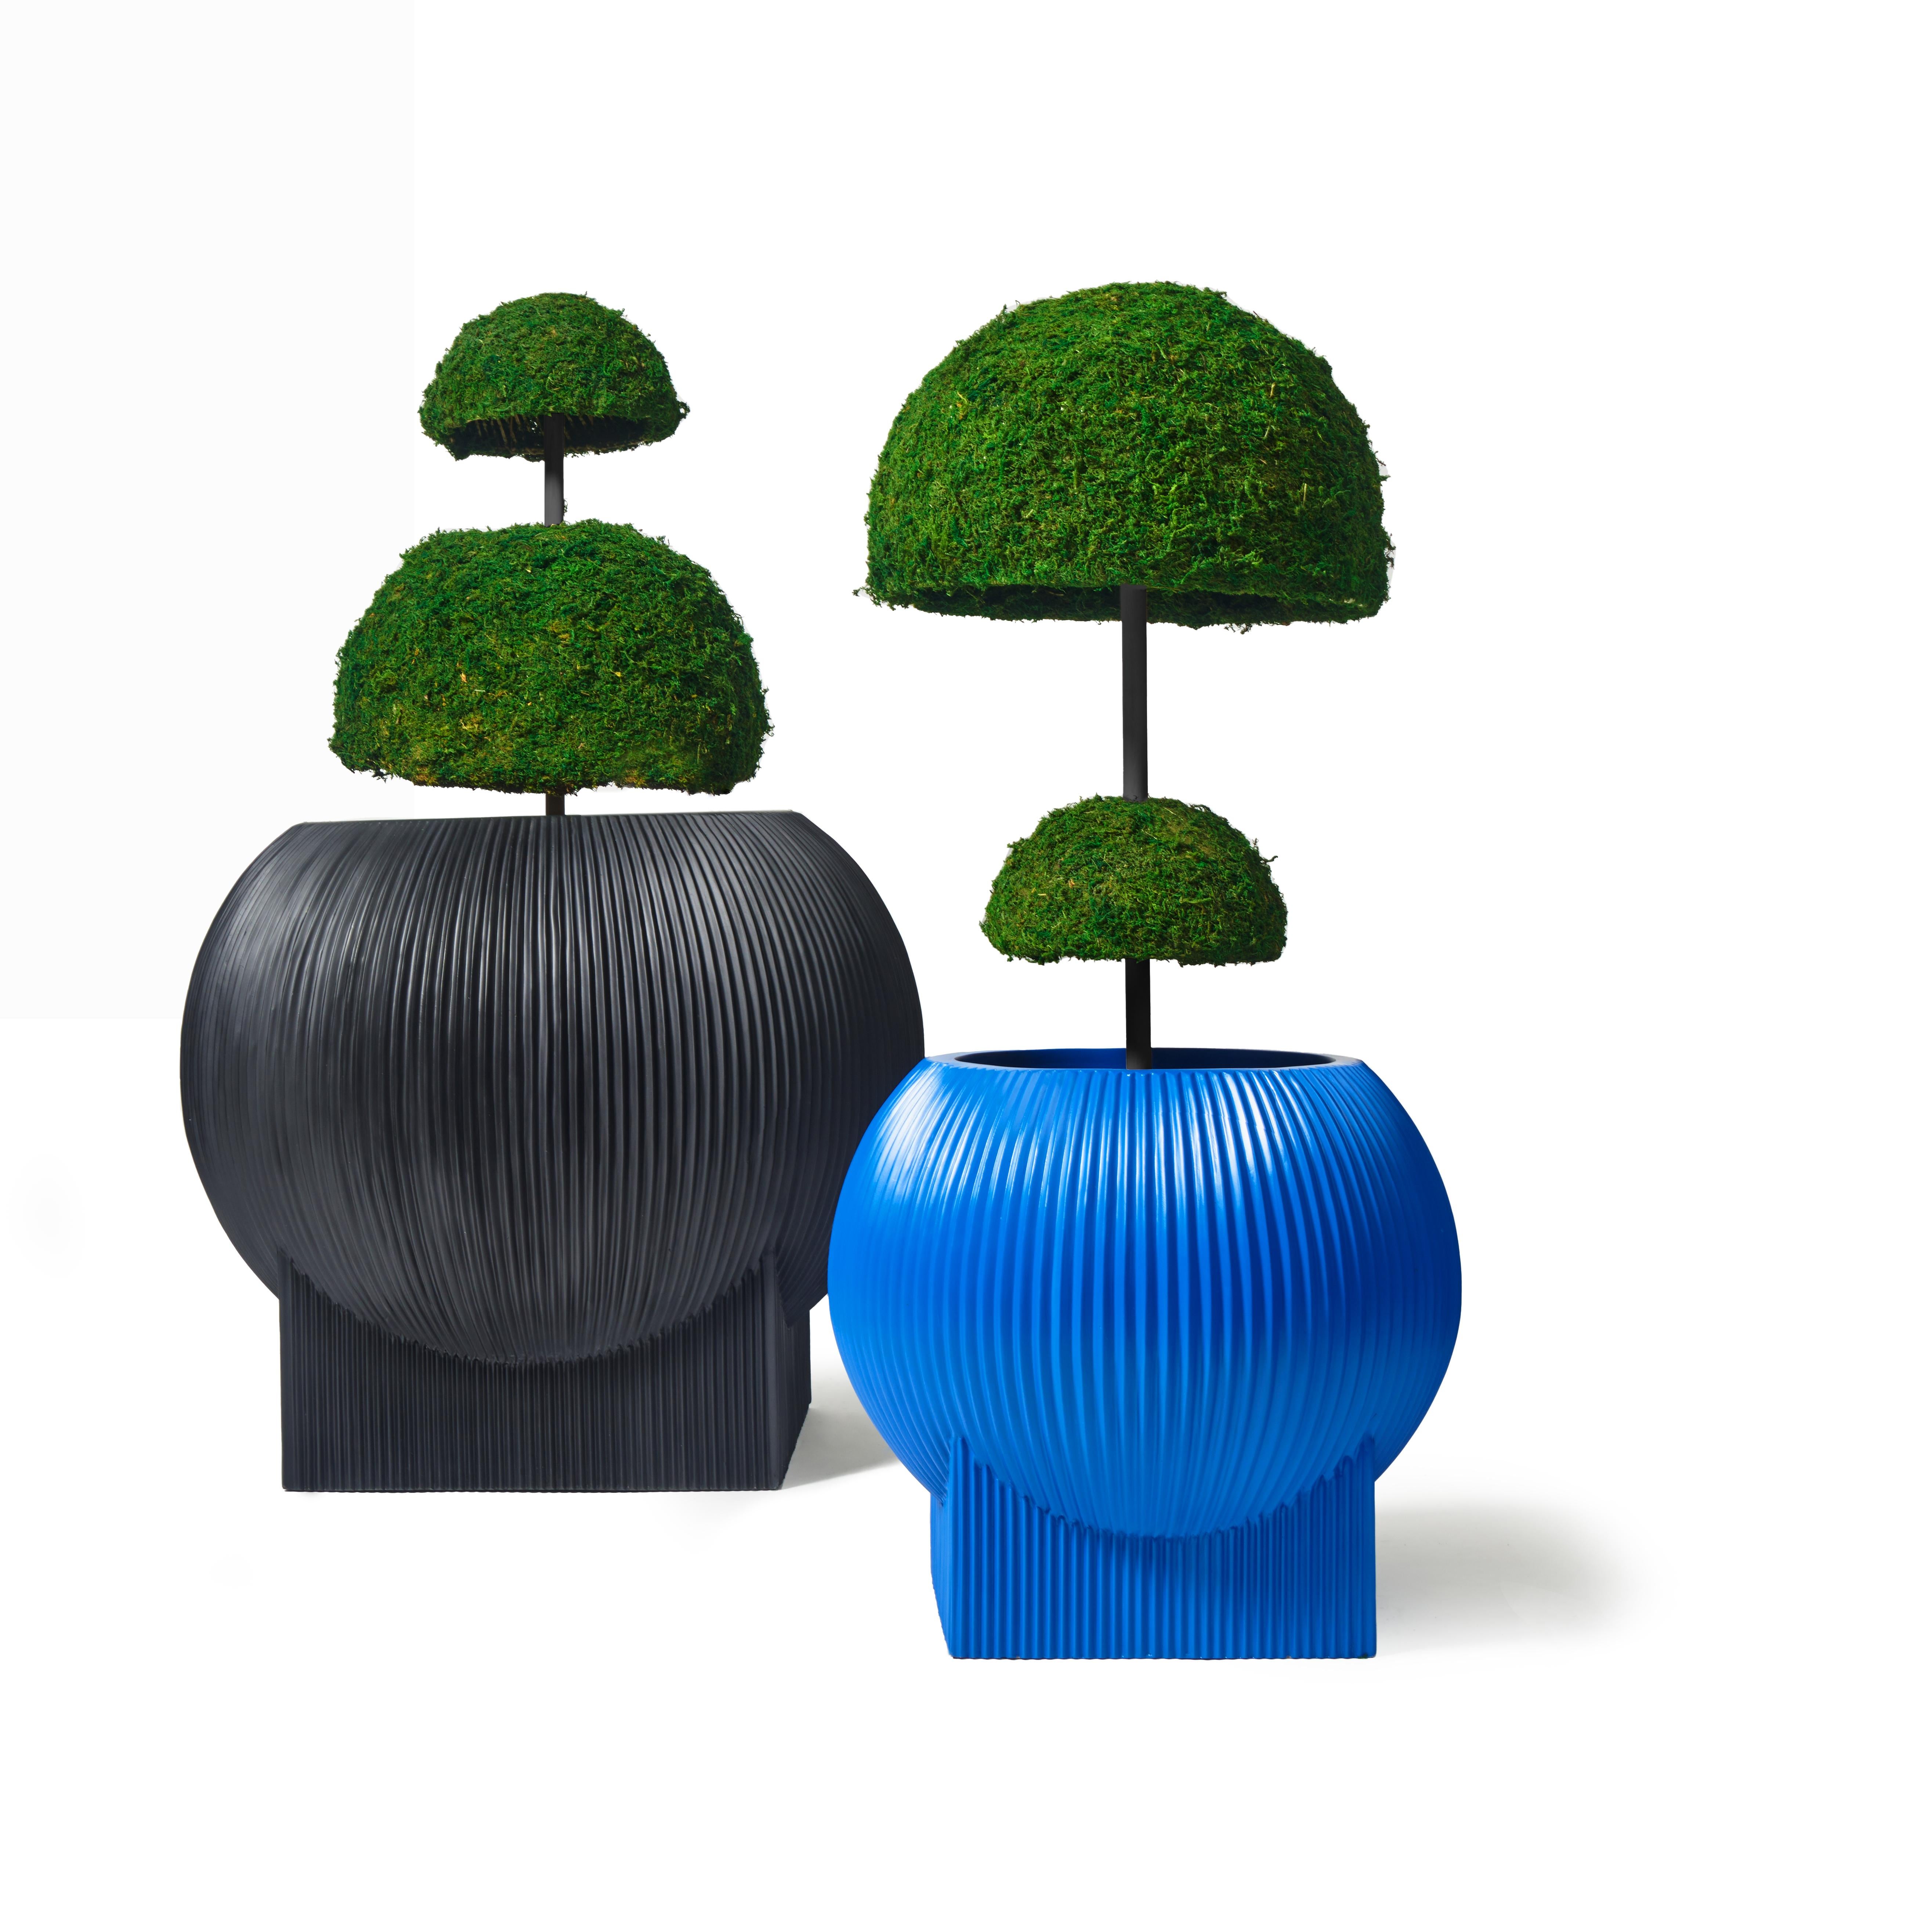 Mexican Standard Flat Blob Planter 'Black' by TFM, Represented by Tuleste Factory